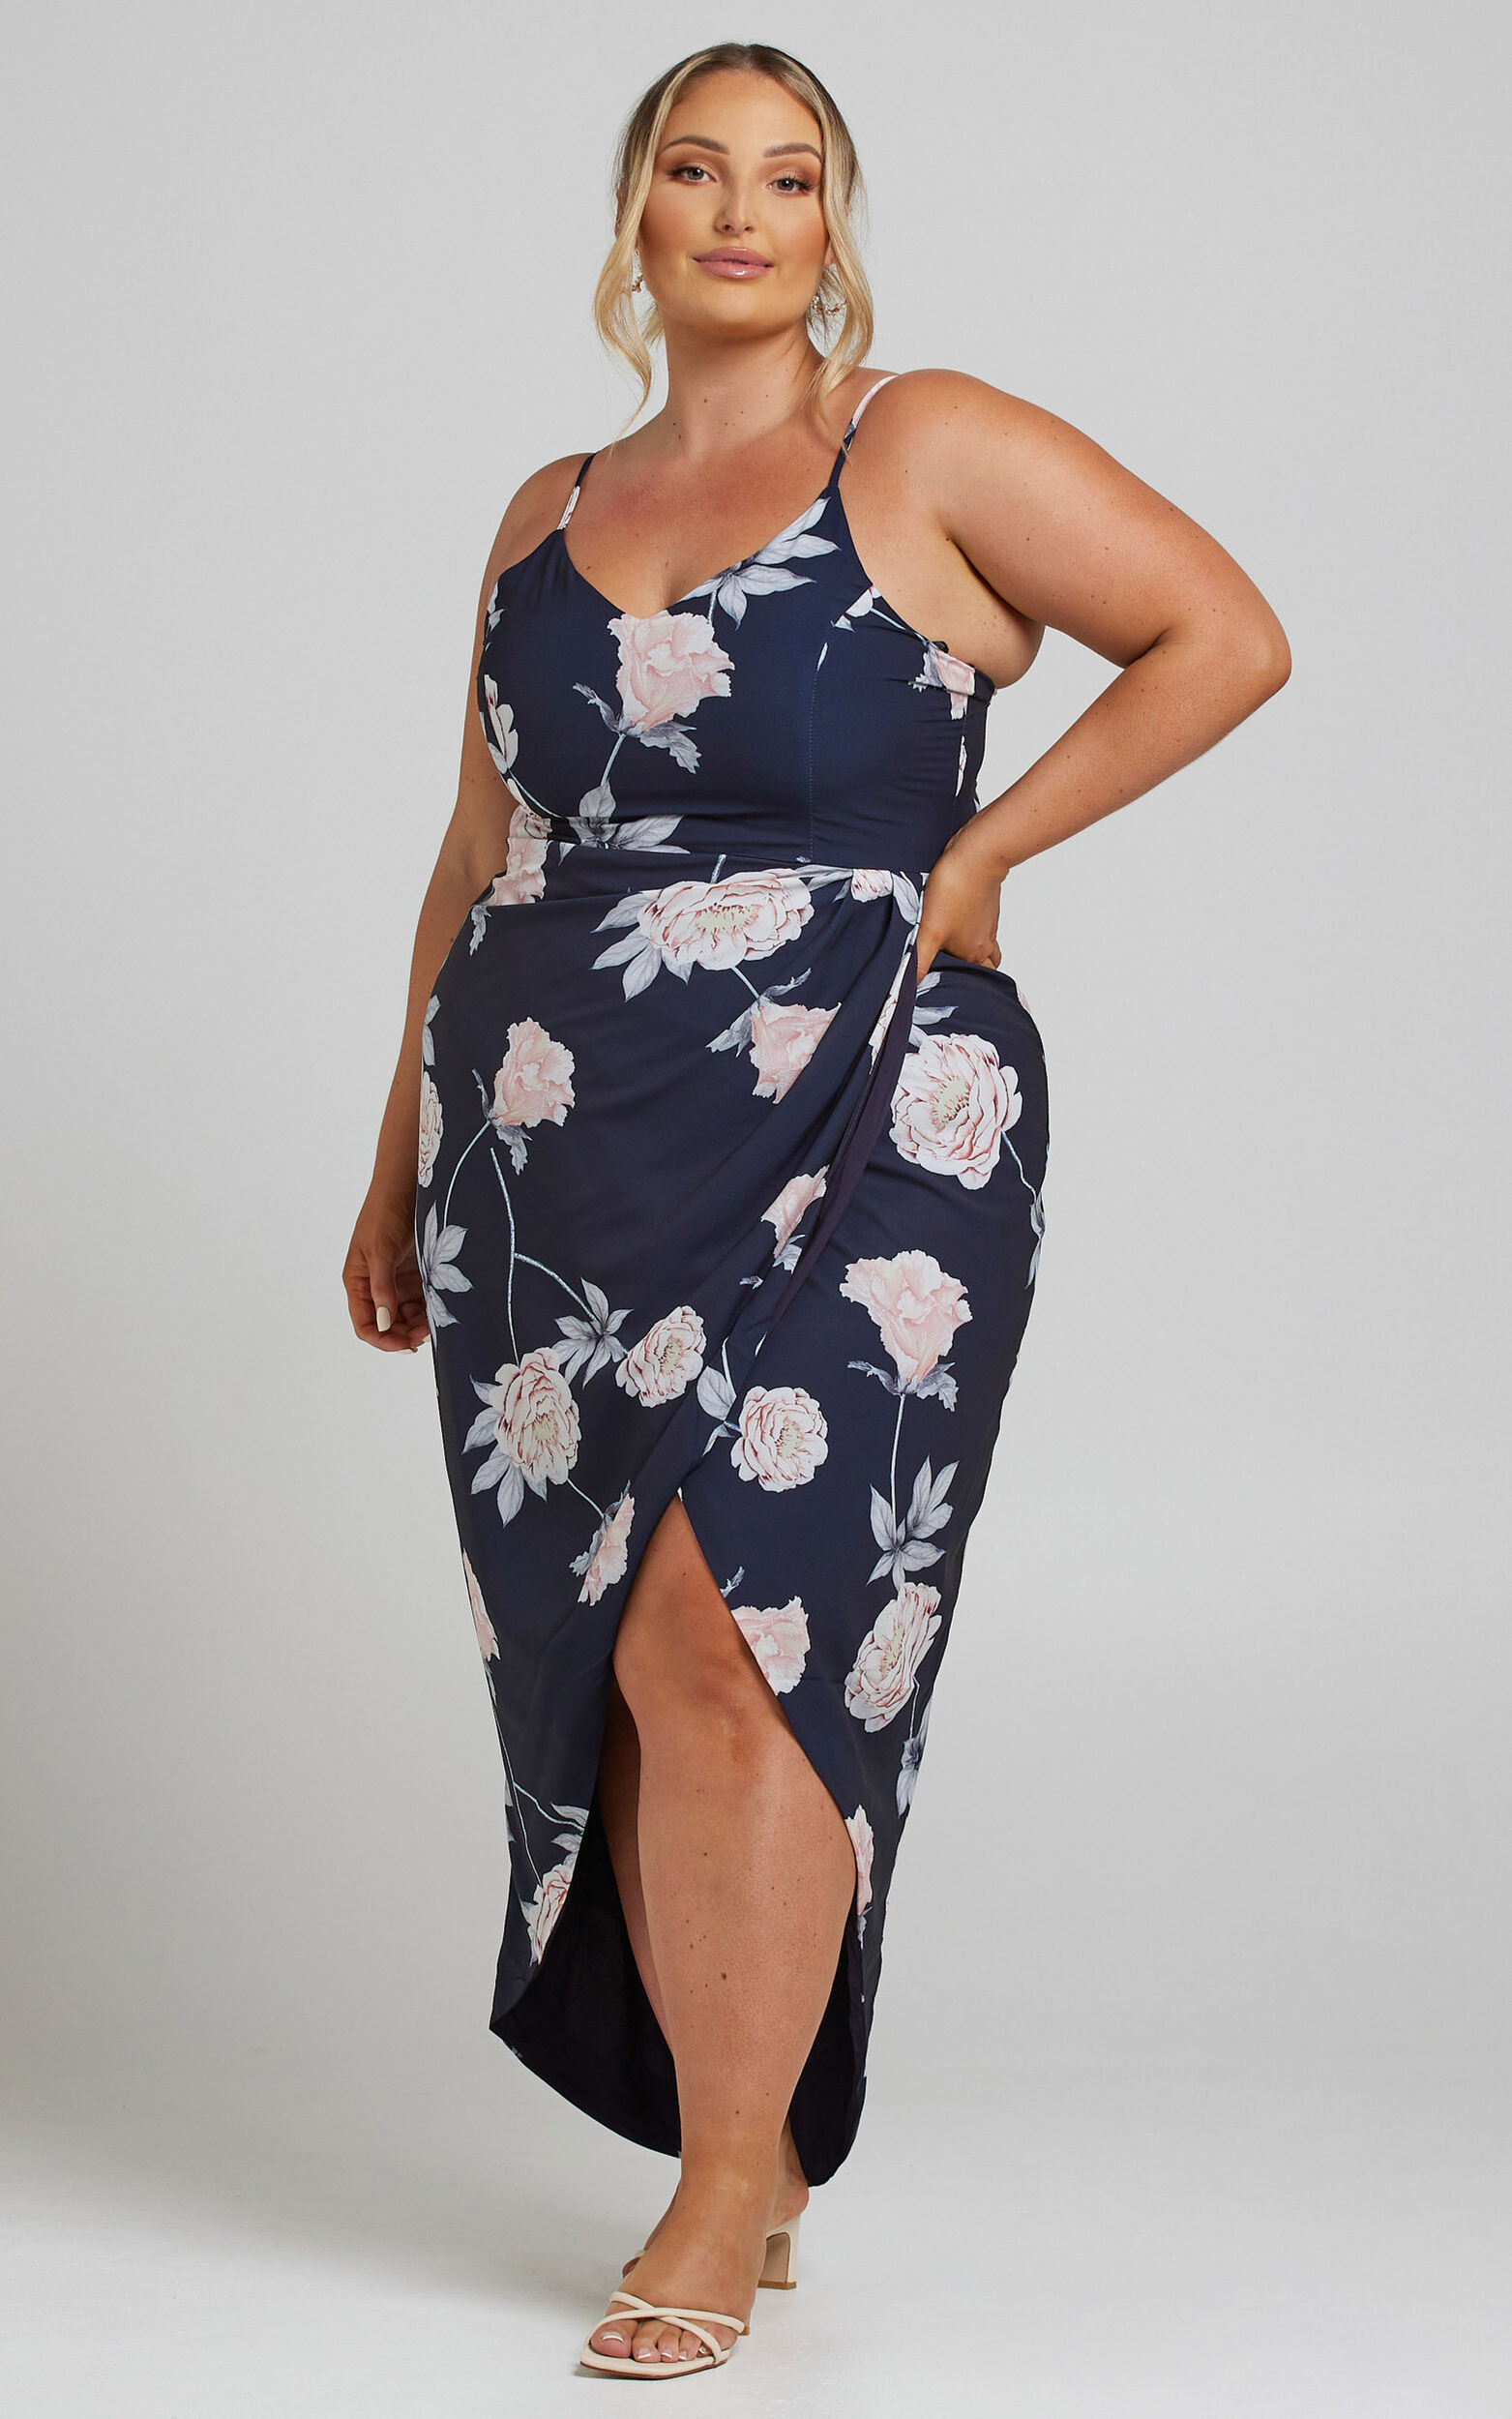 Just This Once Dress in Navy Floral | Showpo USA